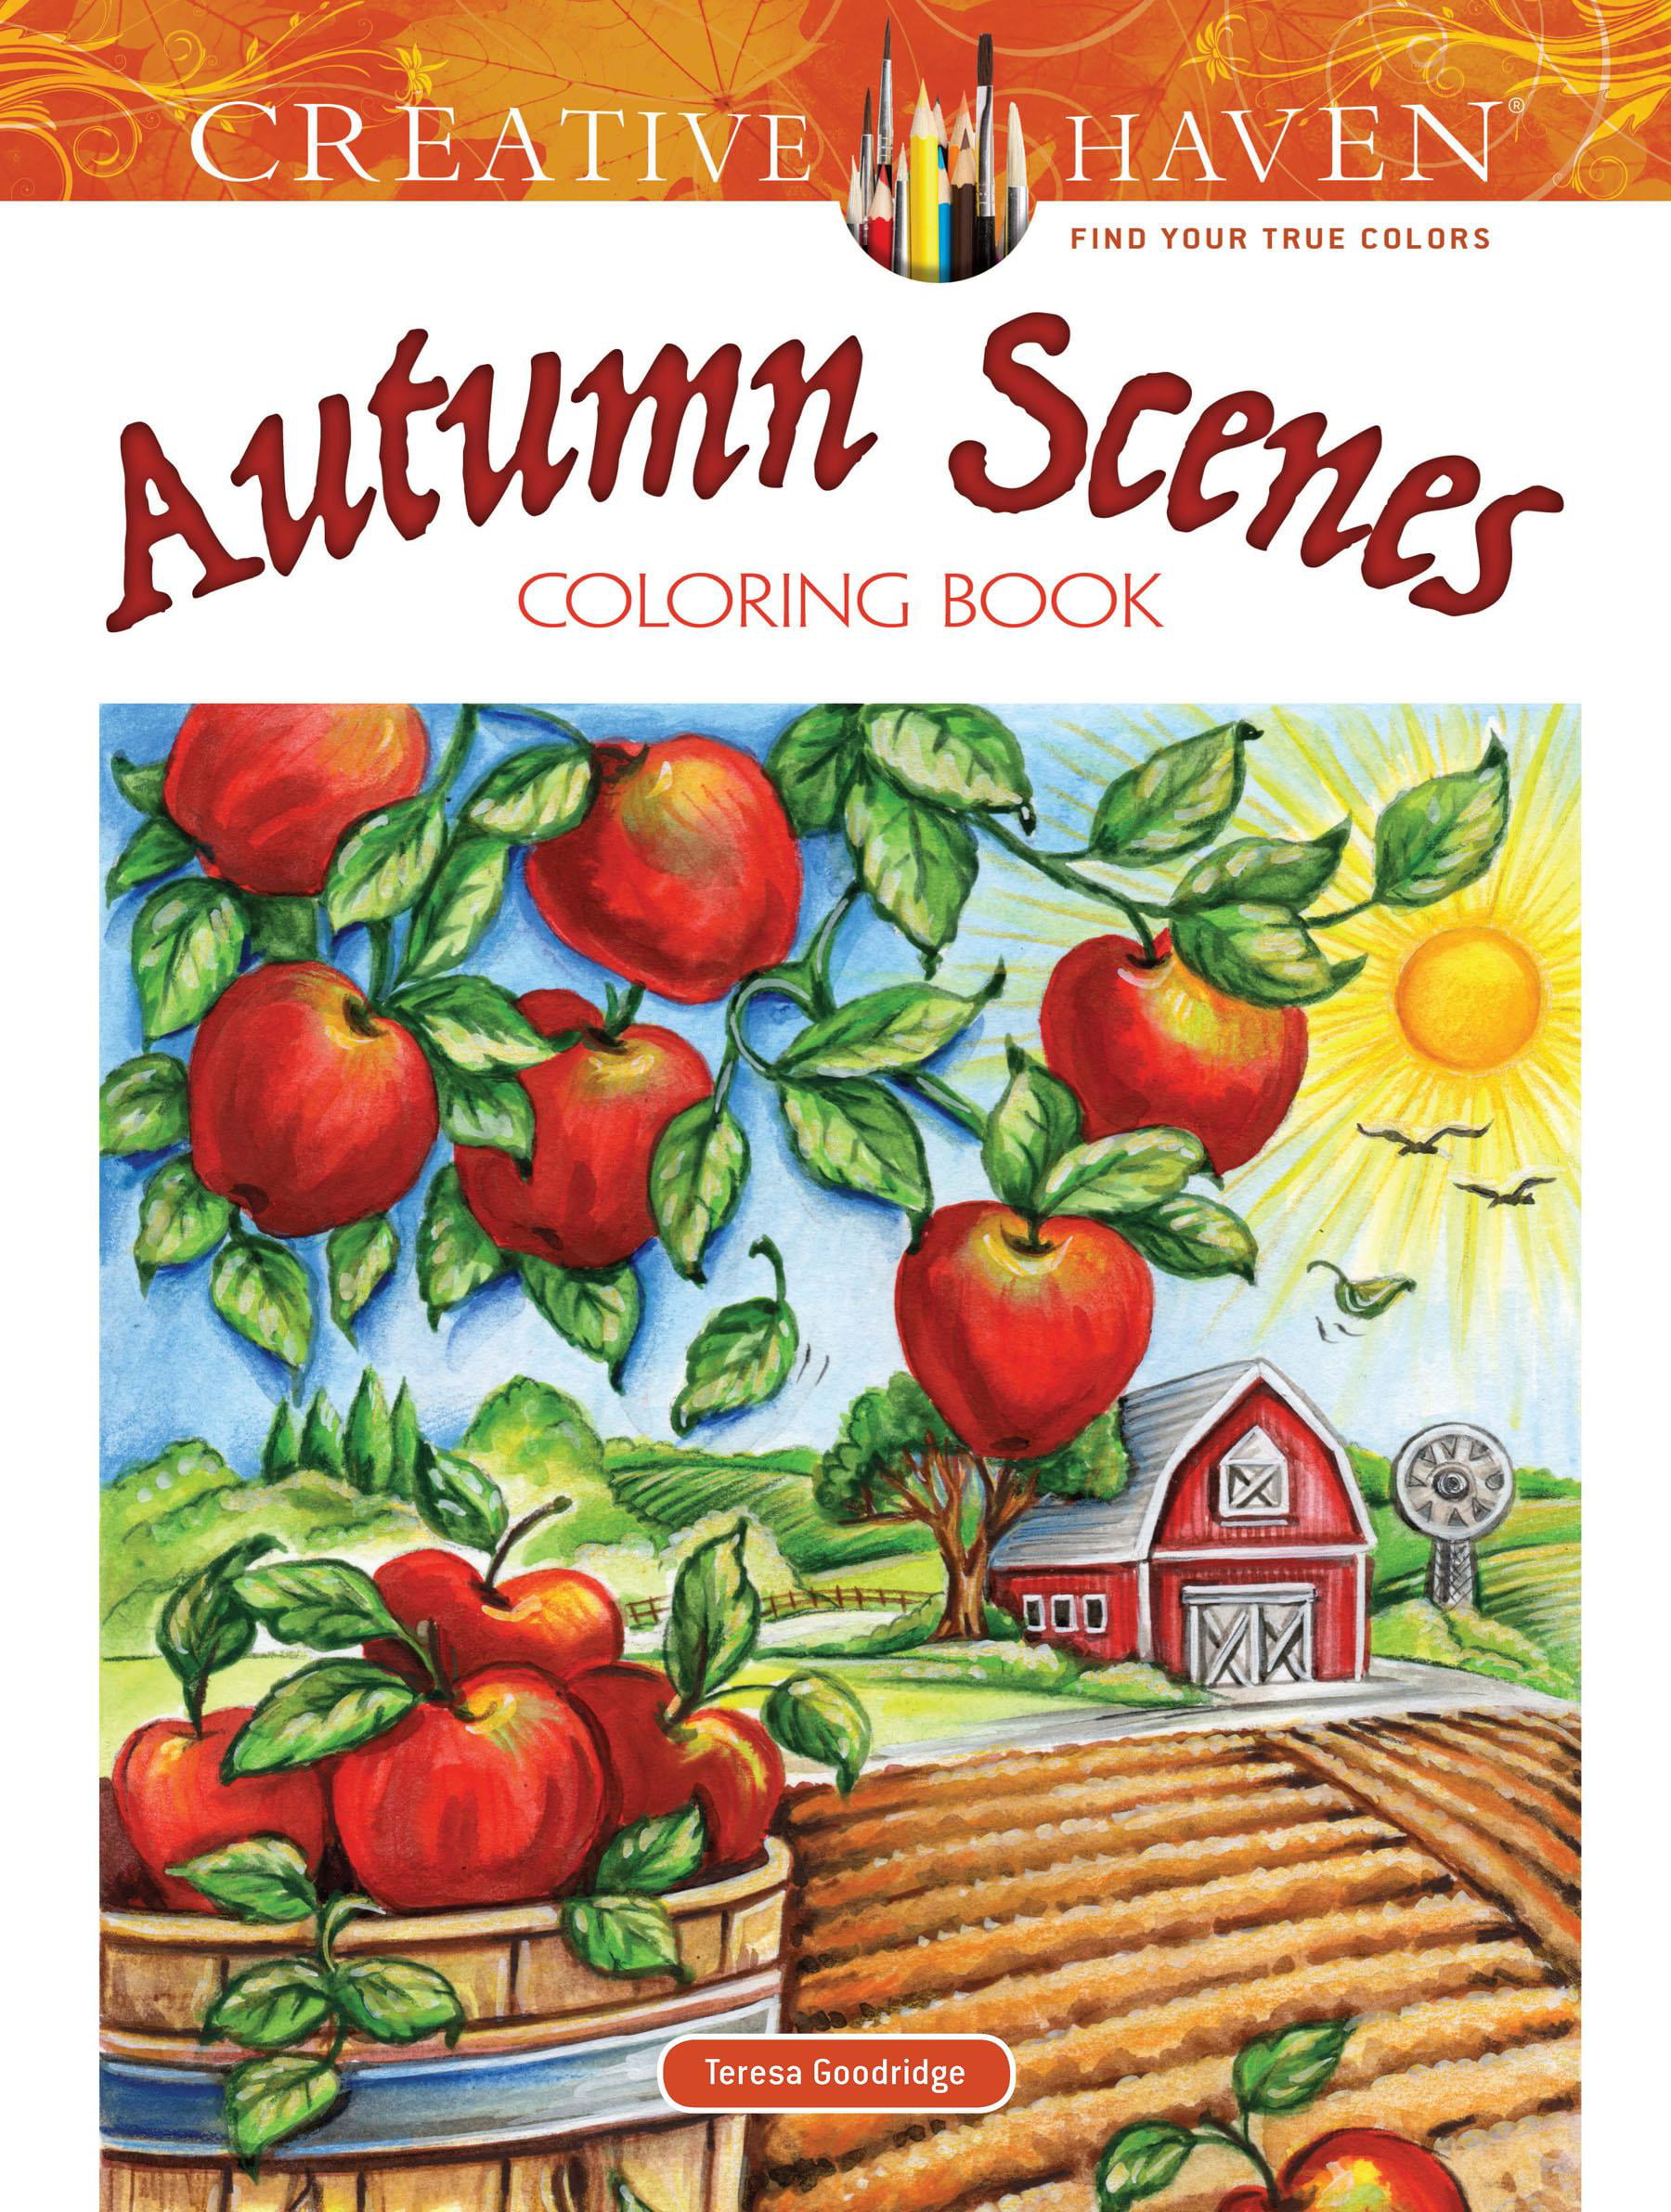 Adult Coloring: Creative Haven Autumn Scenes Coloring Book (Paperback